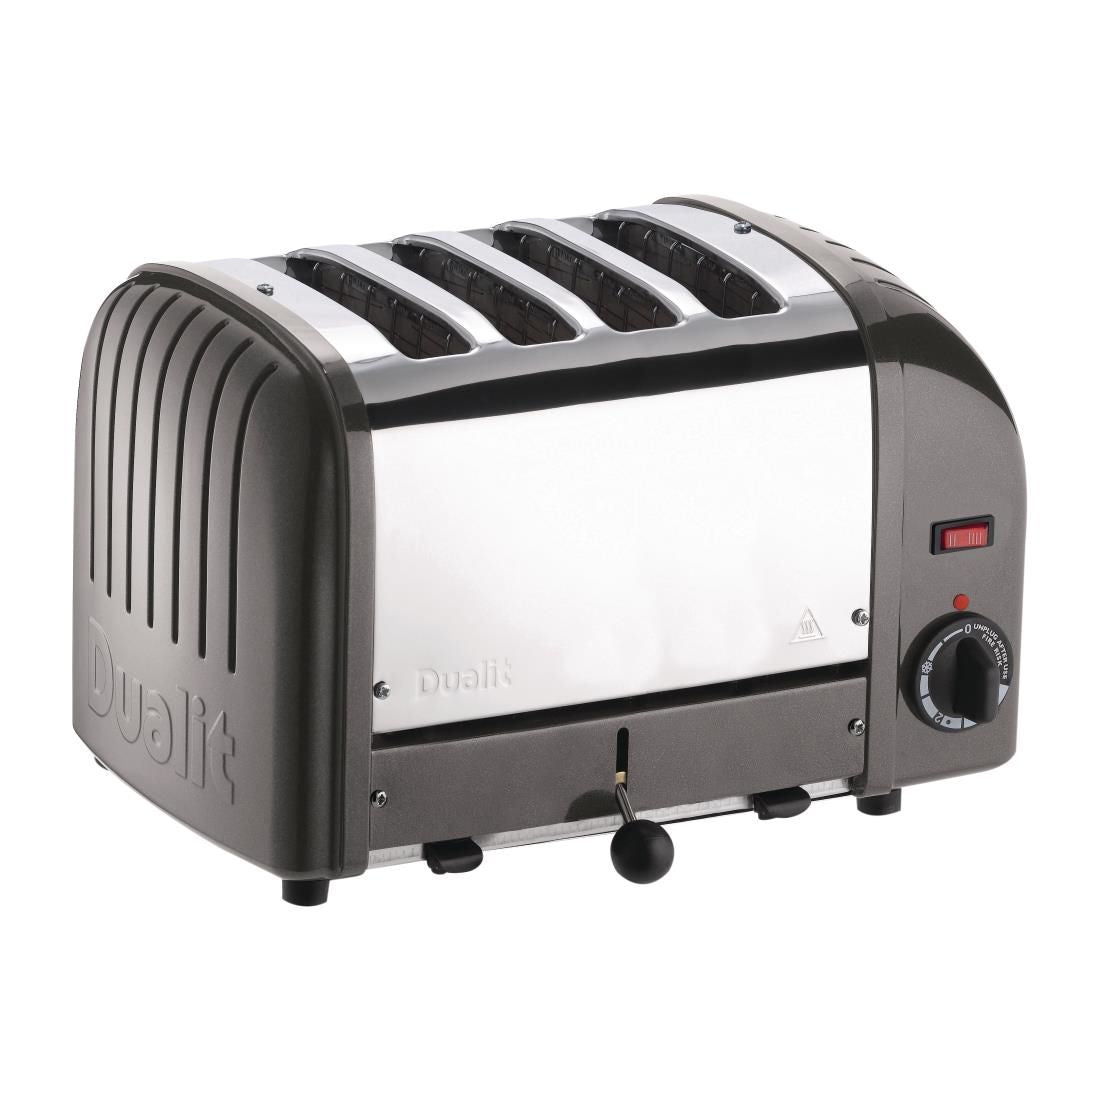 Dualit 4 Slice Vario Toaster Charcoal 40348 JD Catering Equipment Solutions Ltd